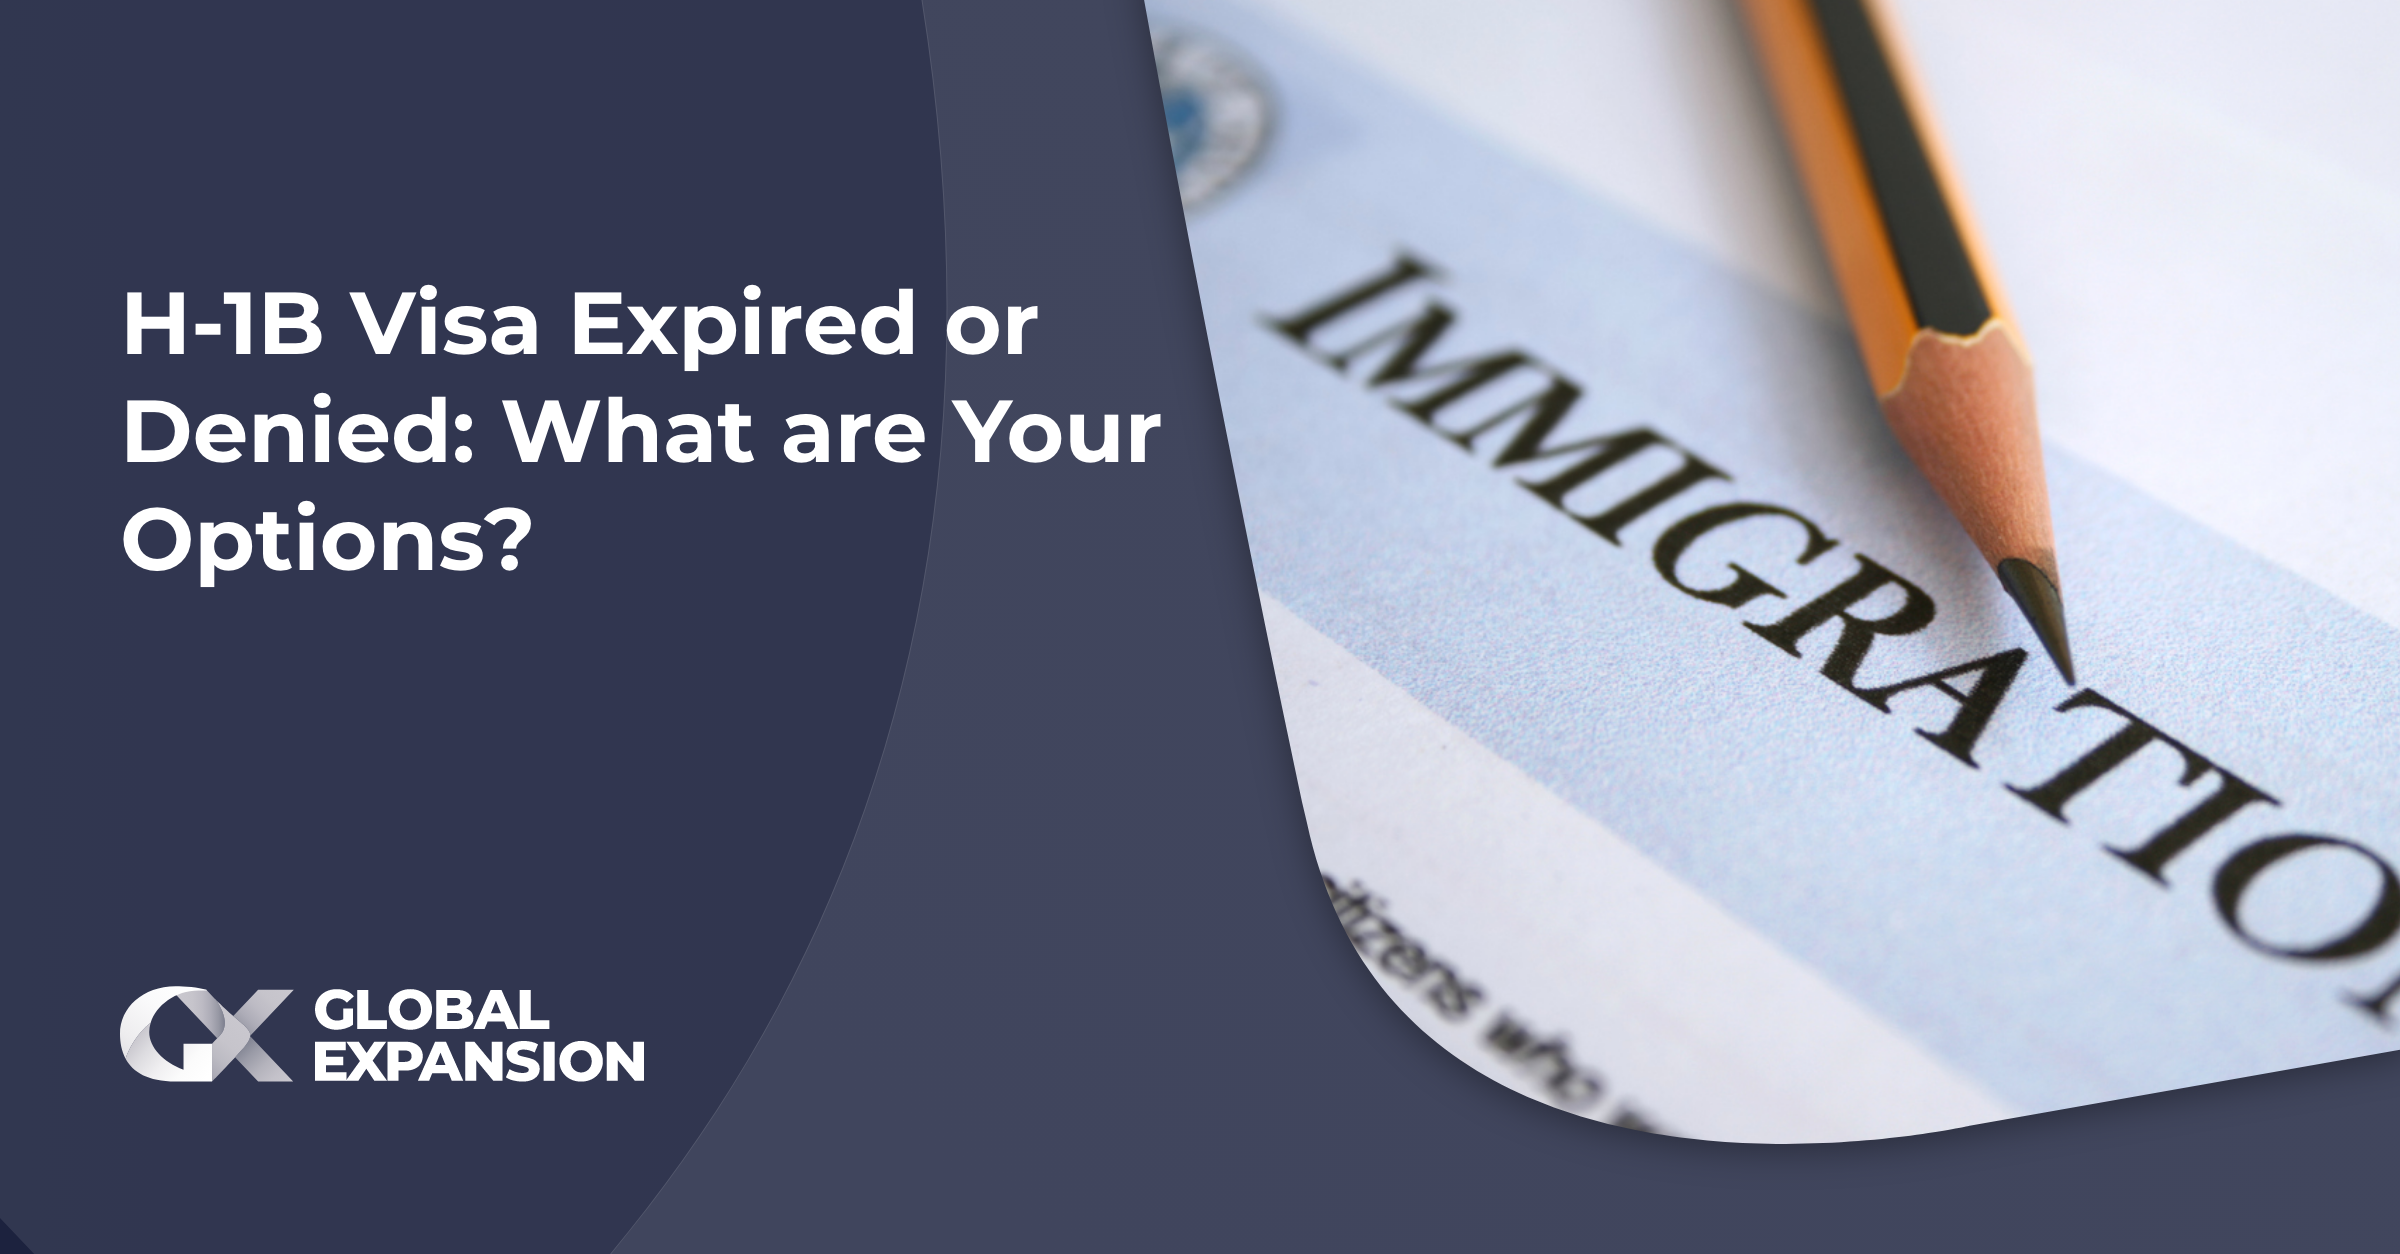 H-1B Visa Expired or Denied: What are Your Options?